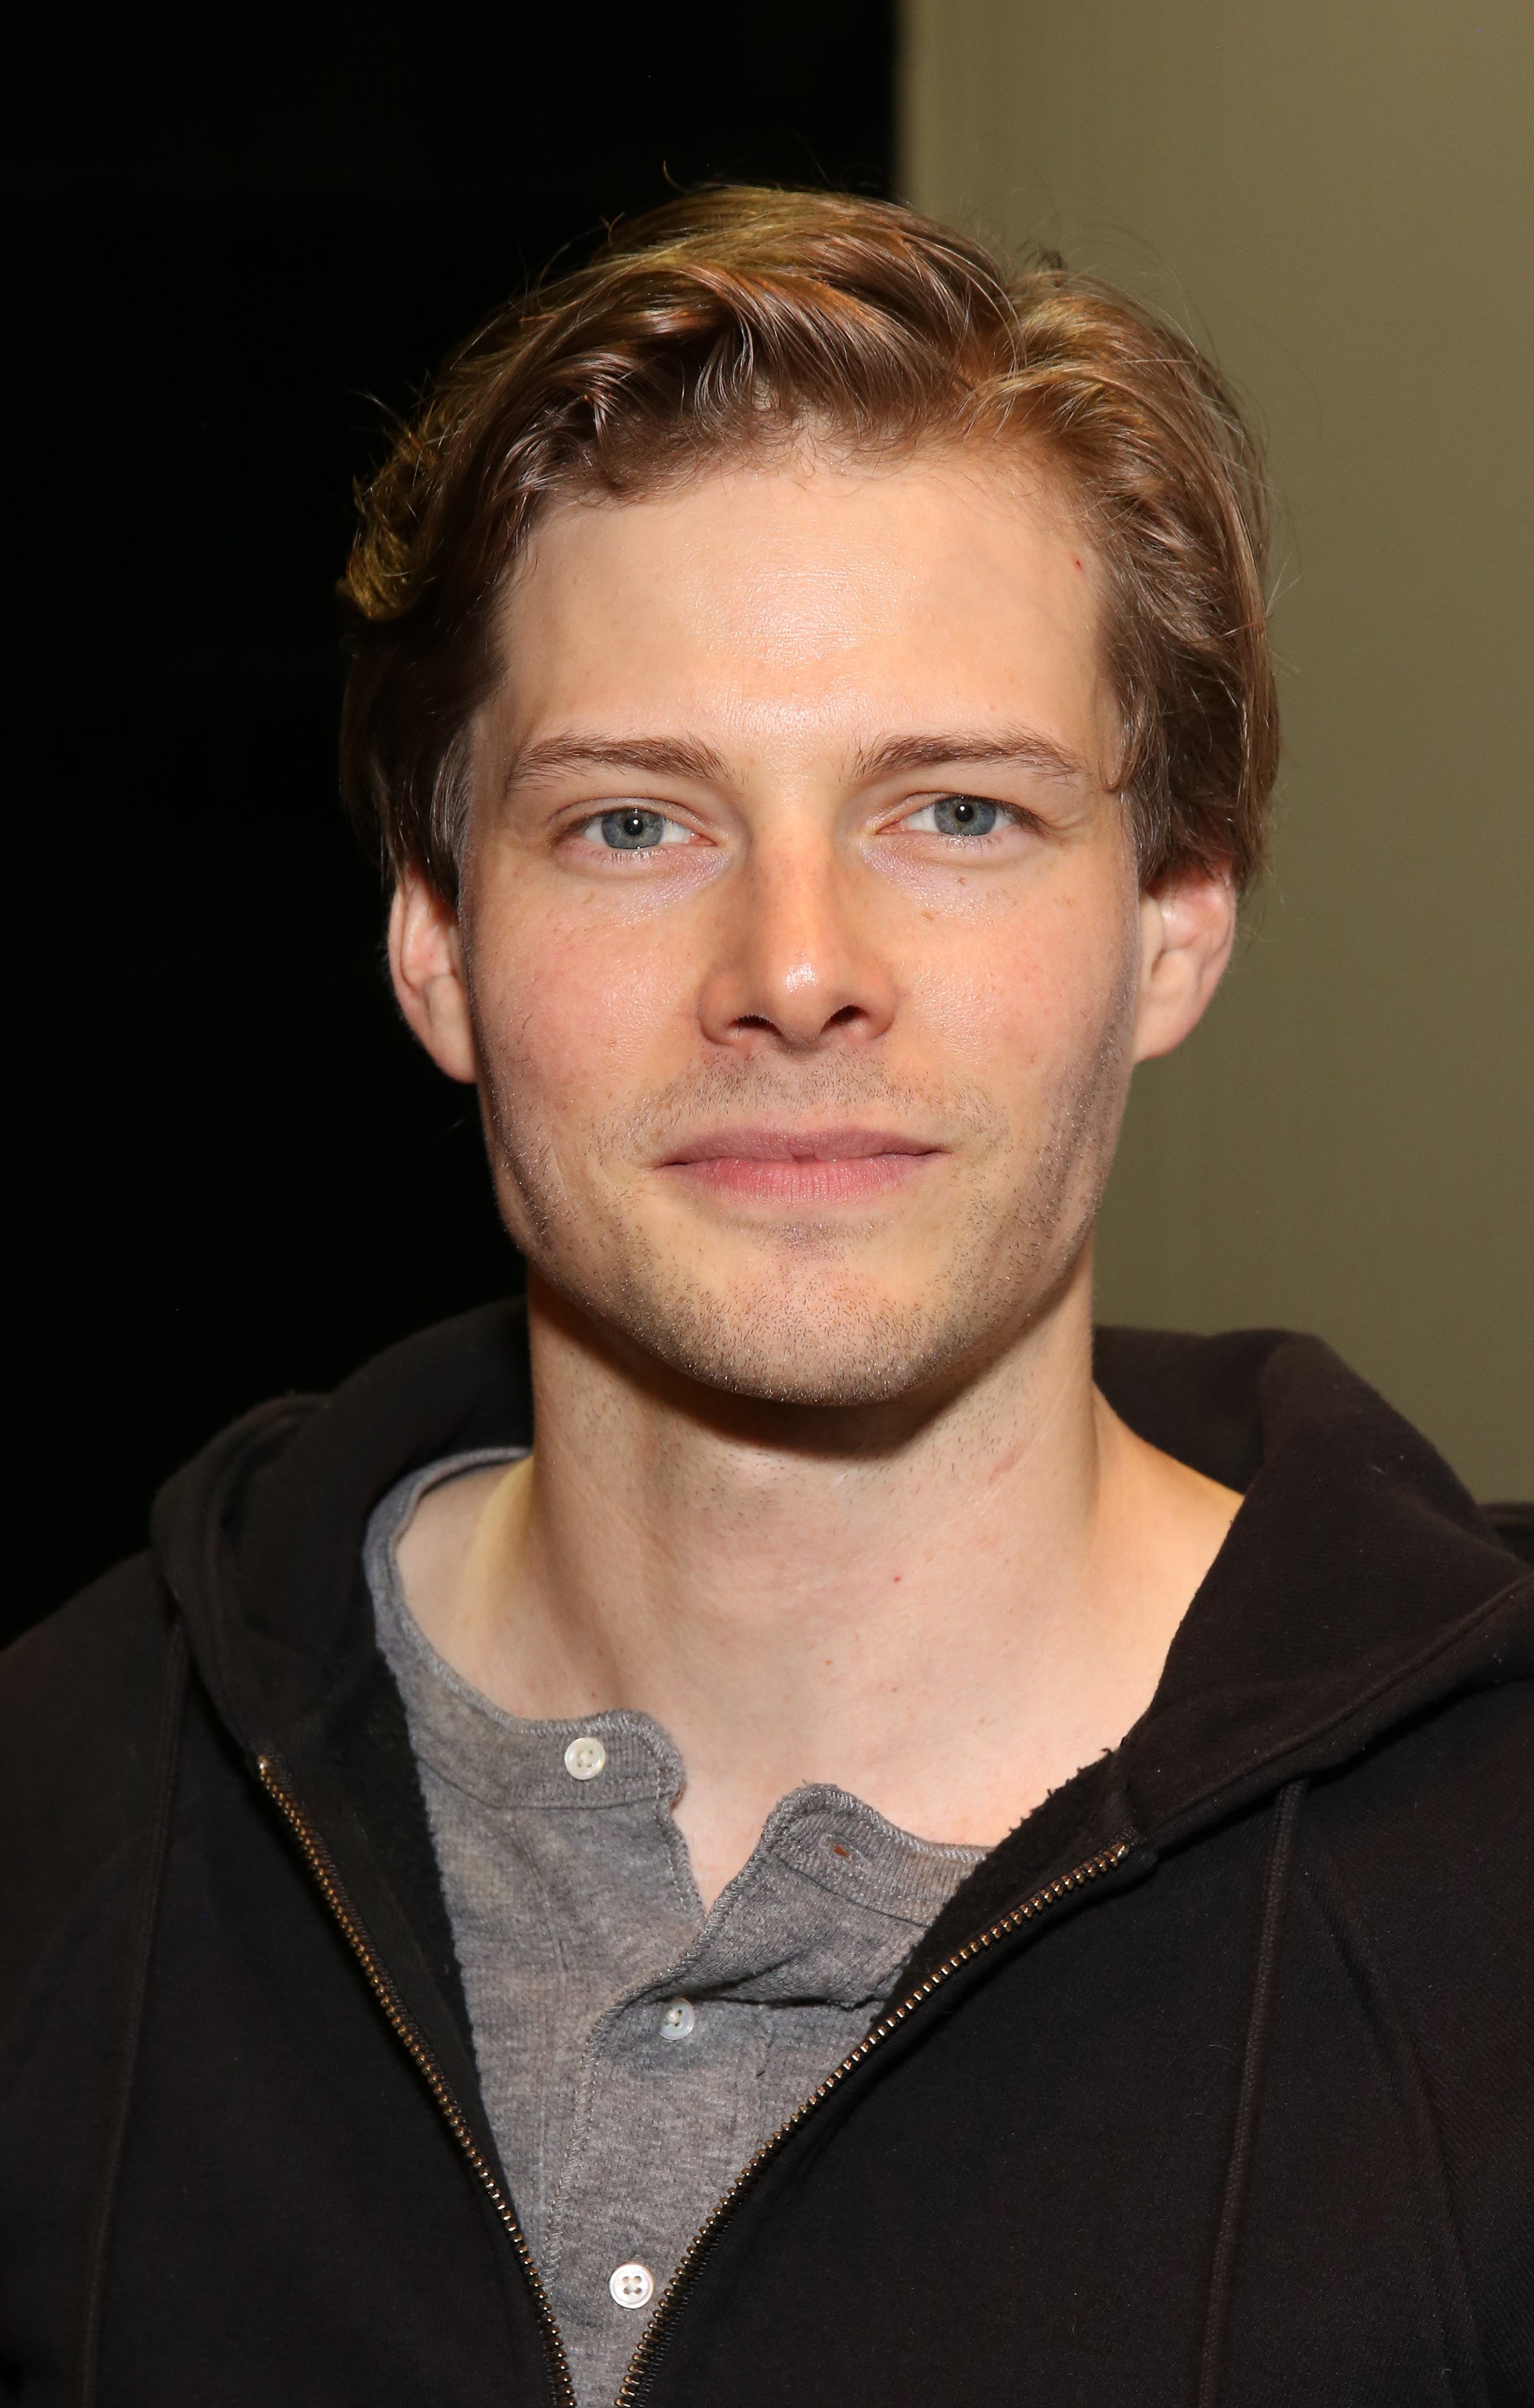 Hunter Parrish poses for a photo at the Cast photo call for the Vineyard Theatre production of "Good Grief" on September 12, 2018, at the Vineyard Theatre in New York City | Source: Getty Images